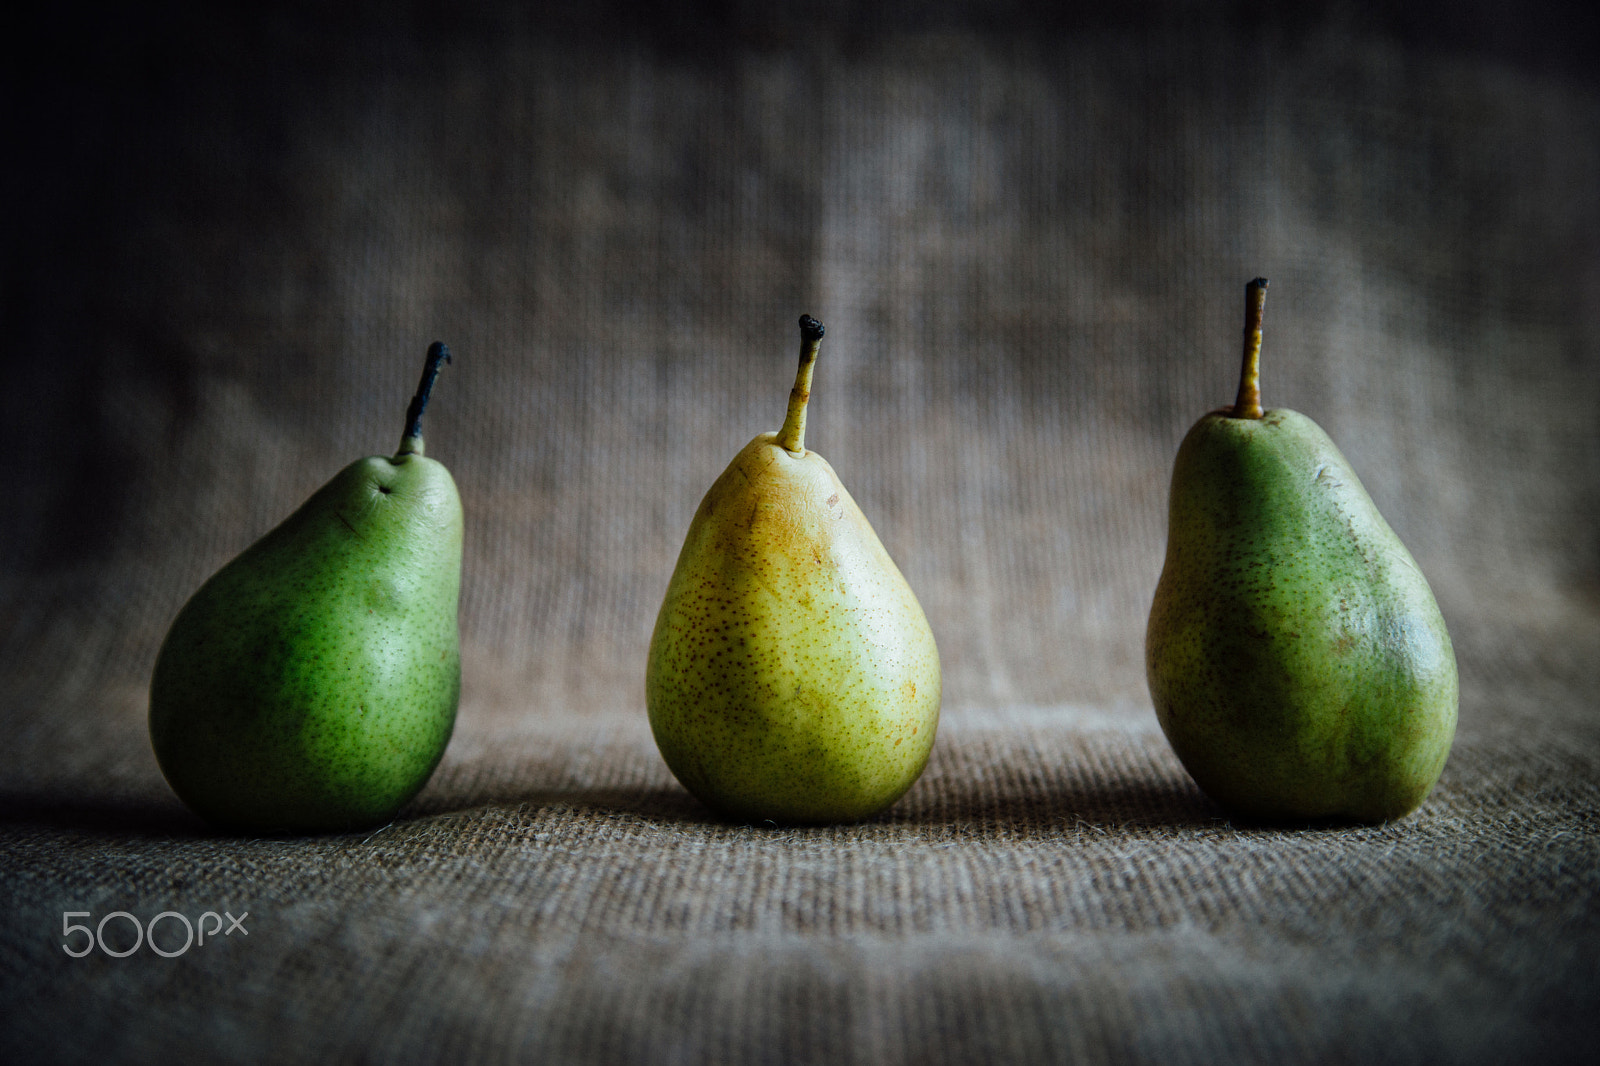 Sony a99 II + Tamron AF 28-75mm F2.8 XR Di LD Aspherical (IF) sample photo. A trio of slightly imperfect pears photography